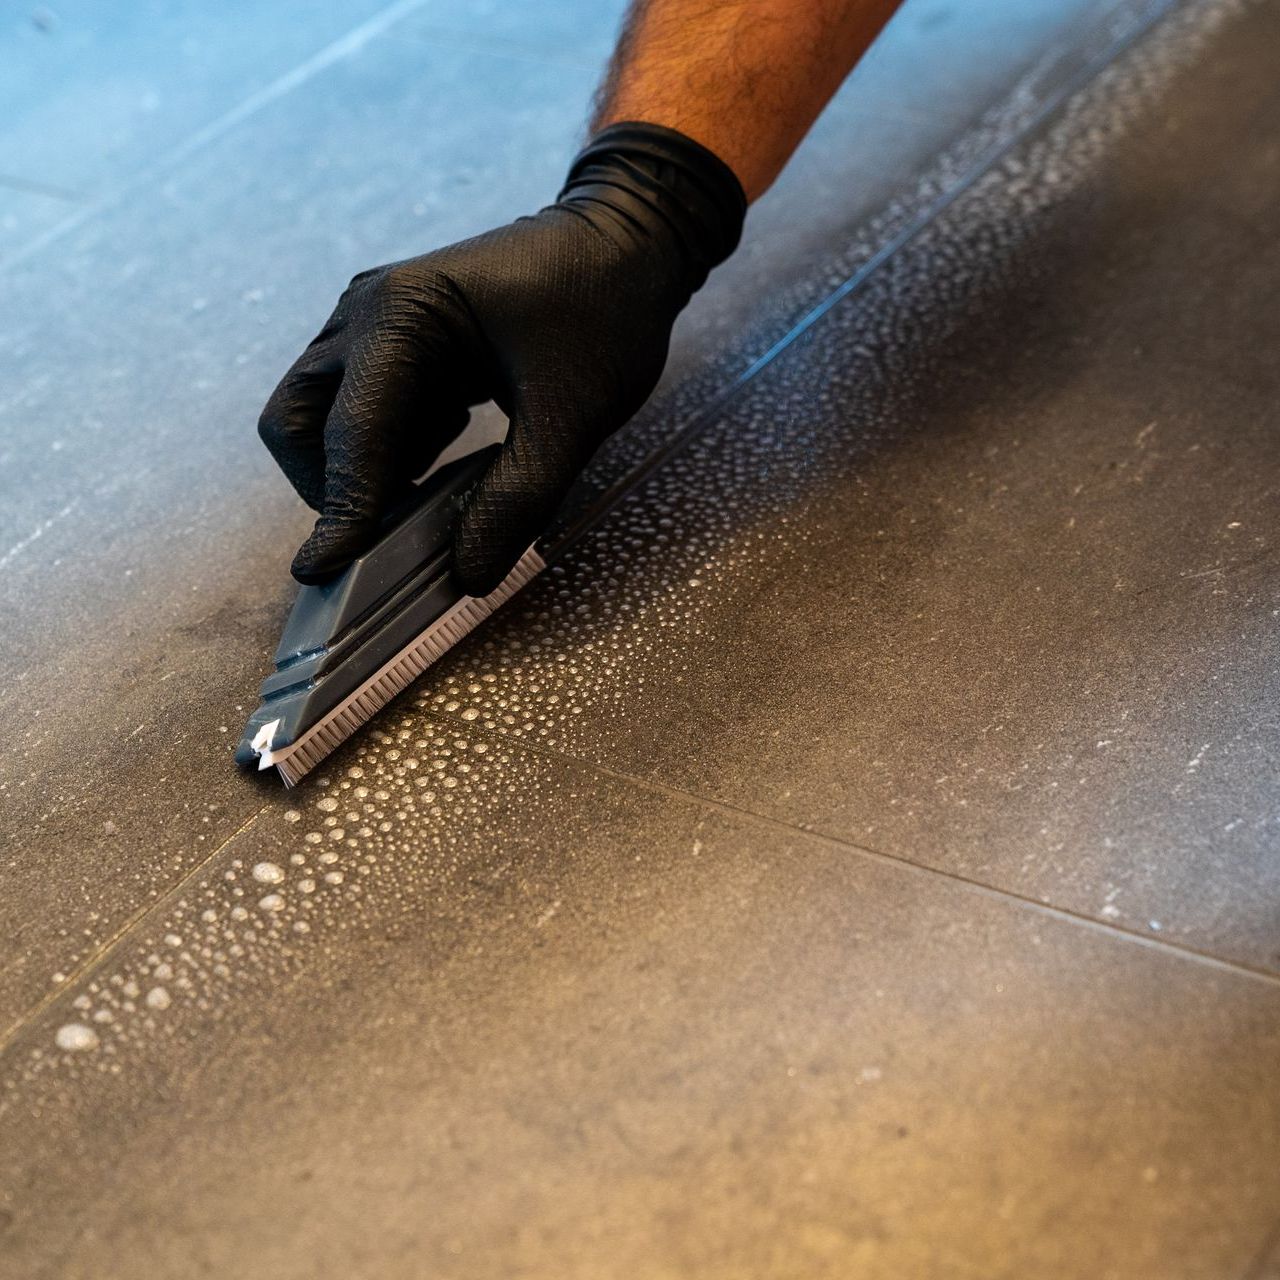 A person wearing black gloves is cleaning a tile floor with a brush